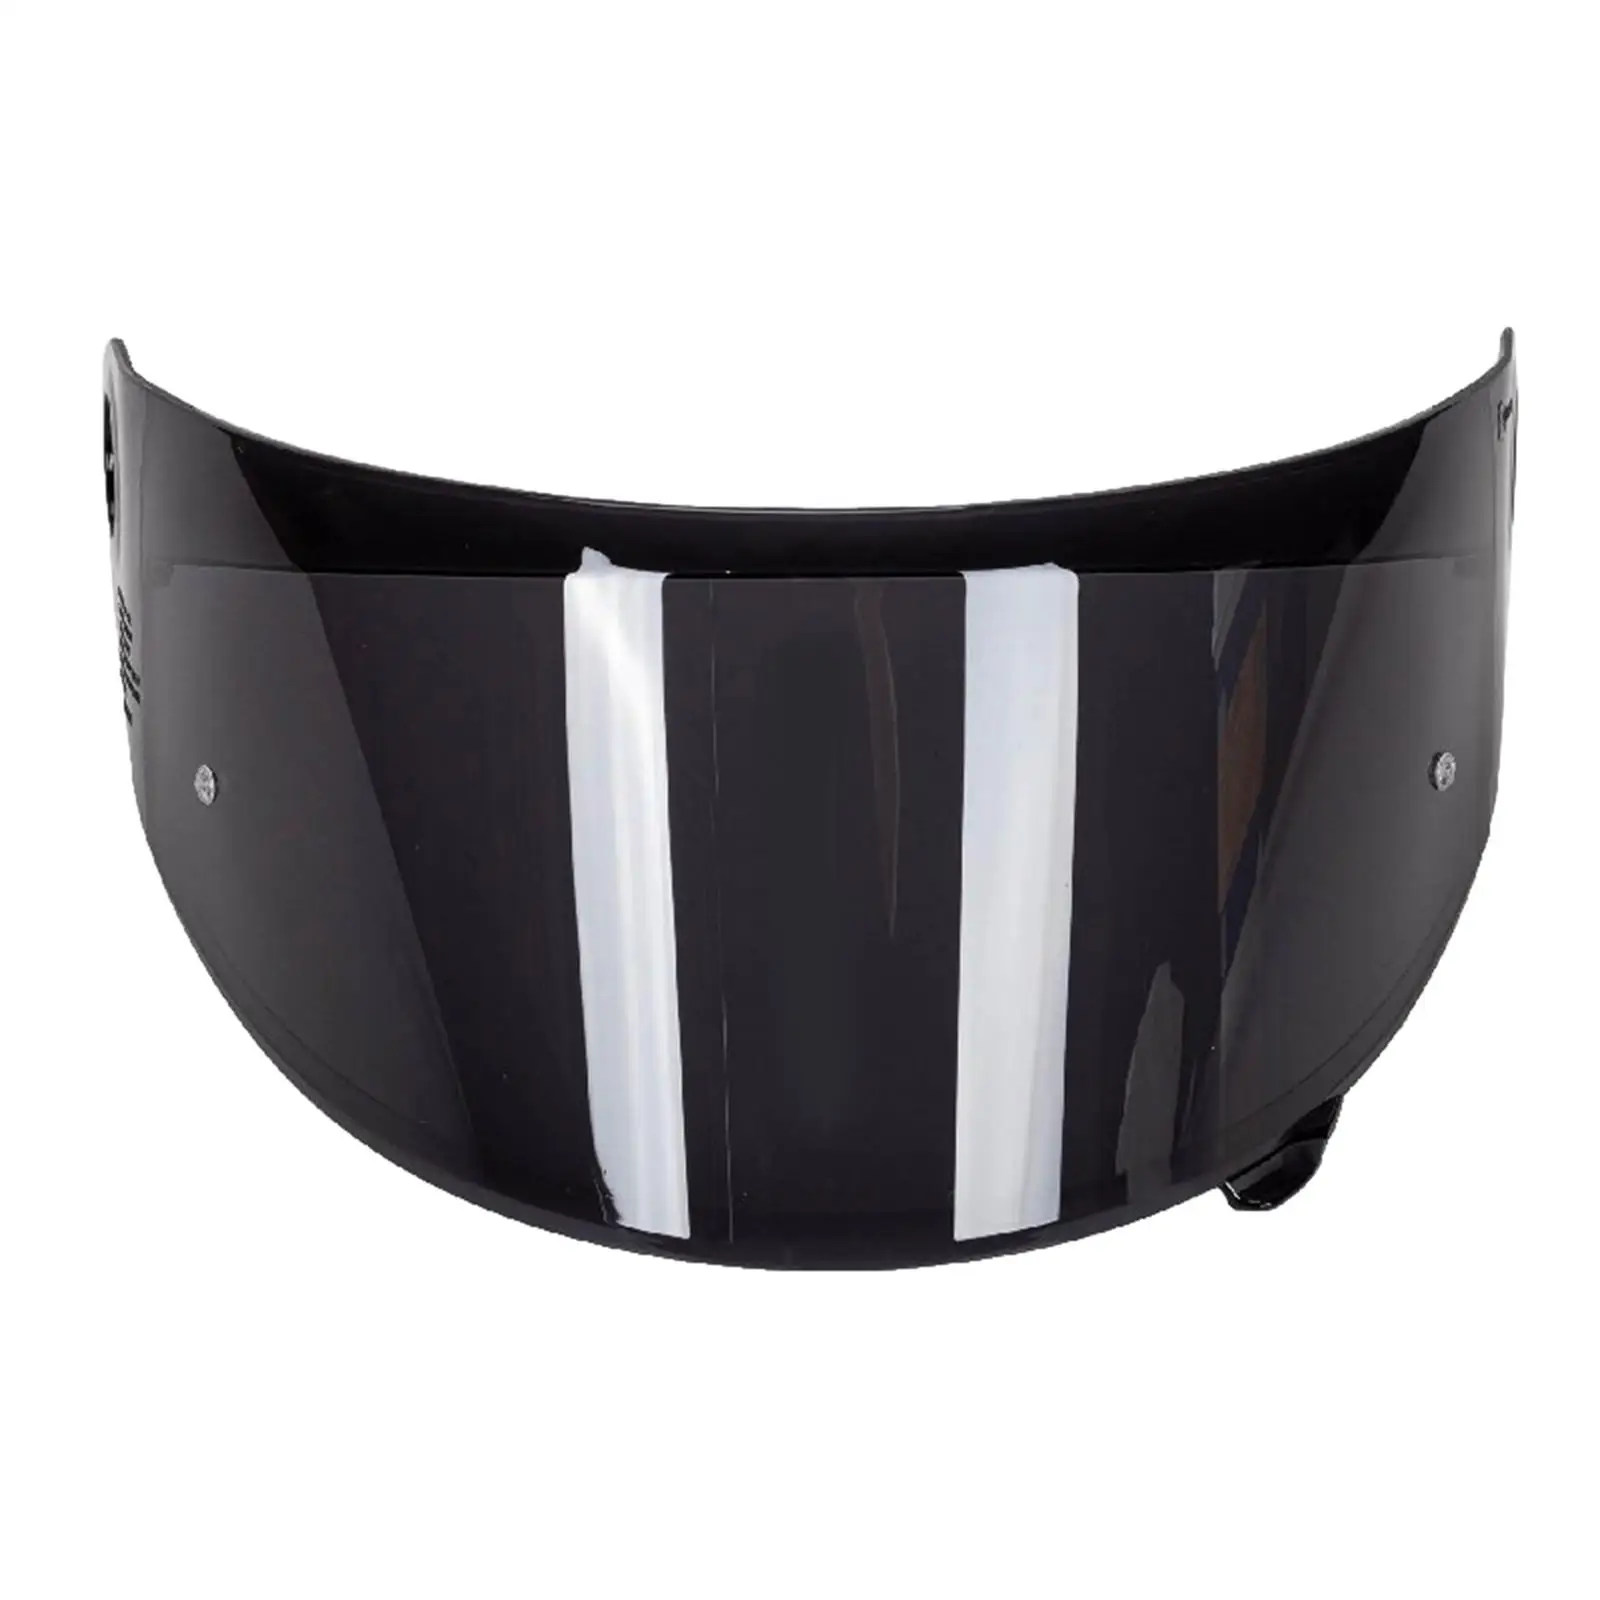 Motorcycle Helmet Shield Lens Replacement Protective Cover Lens Visor Shield Motorbike Anti Scratch for Axxis Darkens